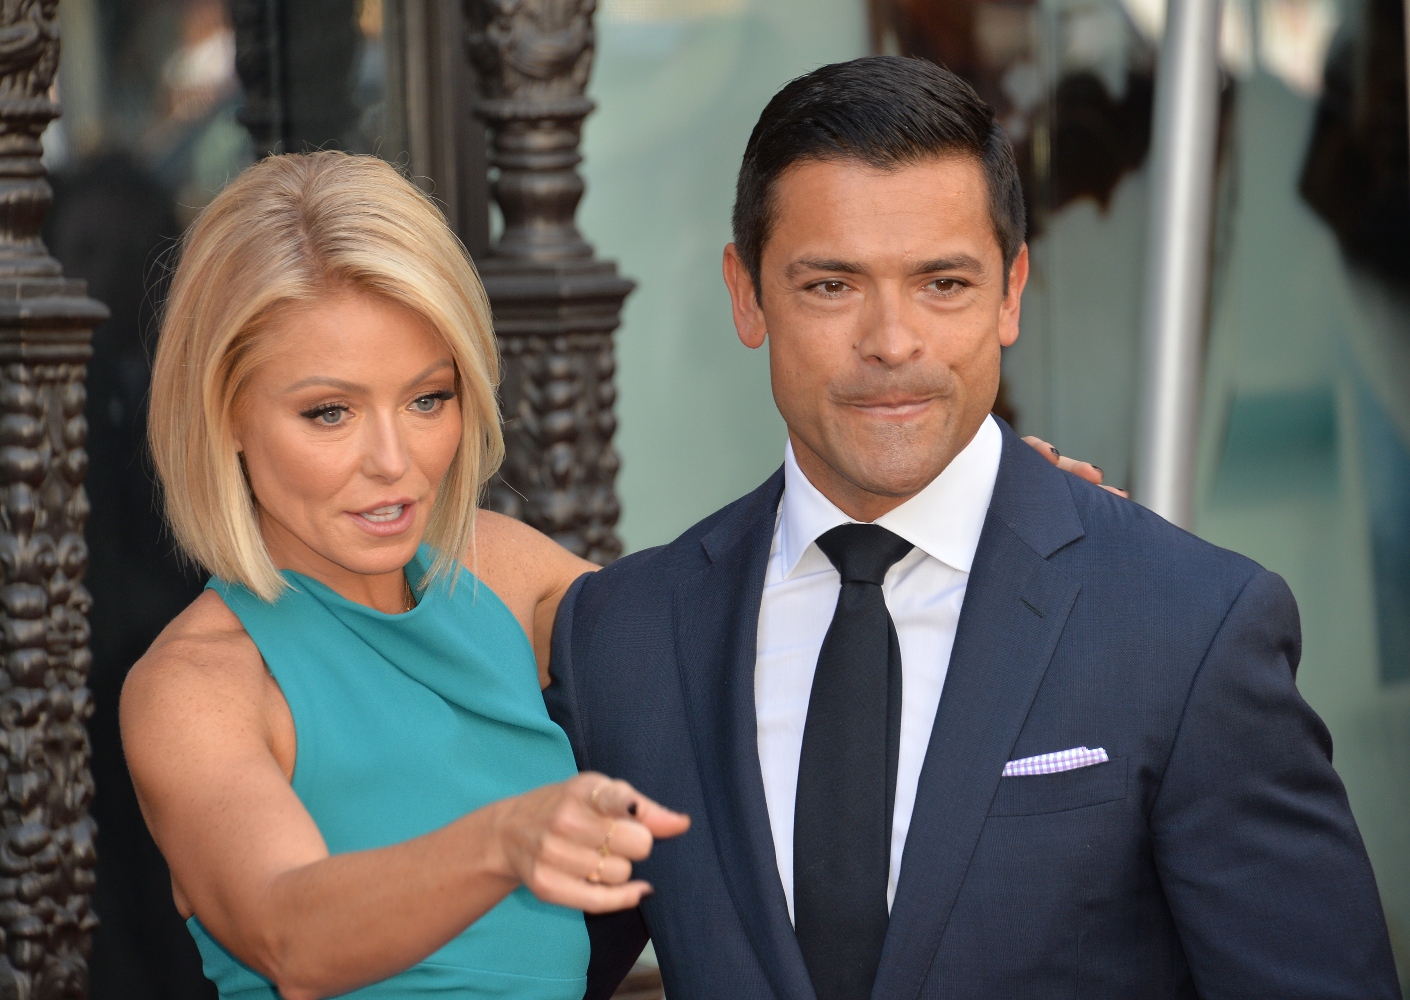 Kelly Ripa And Mark Consuelos On Traditional Marriage Roles